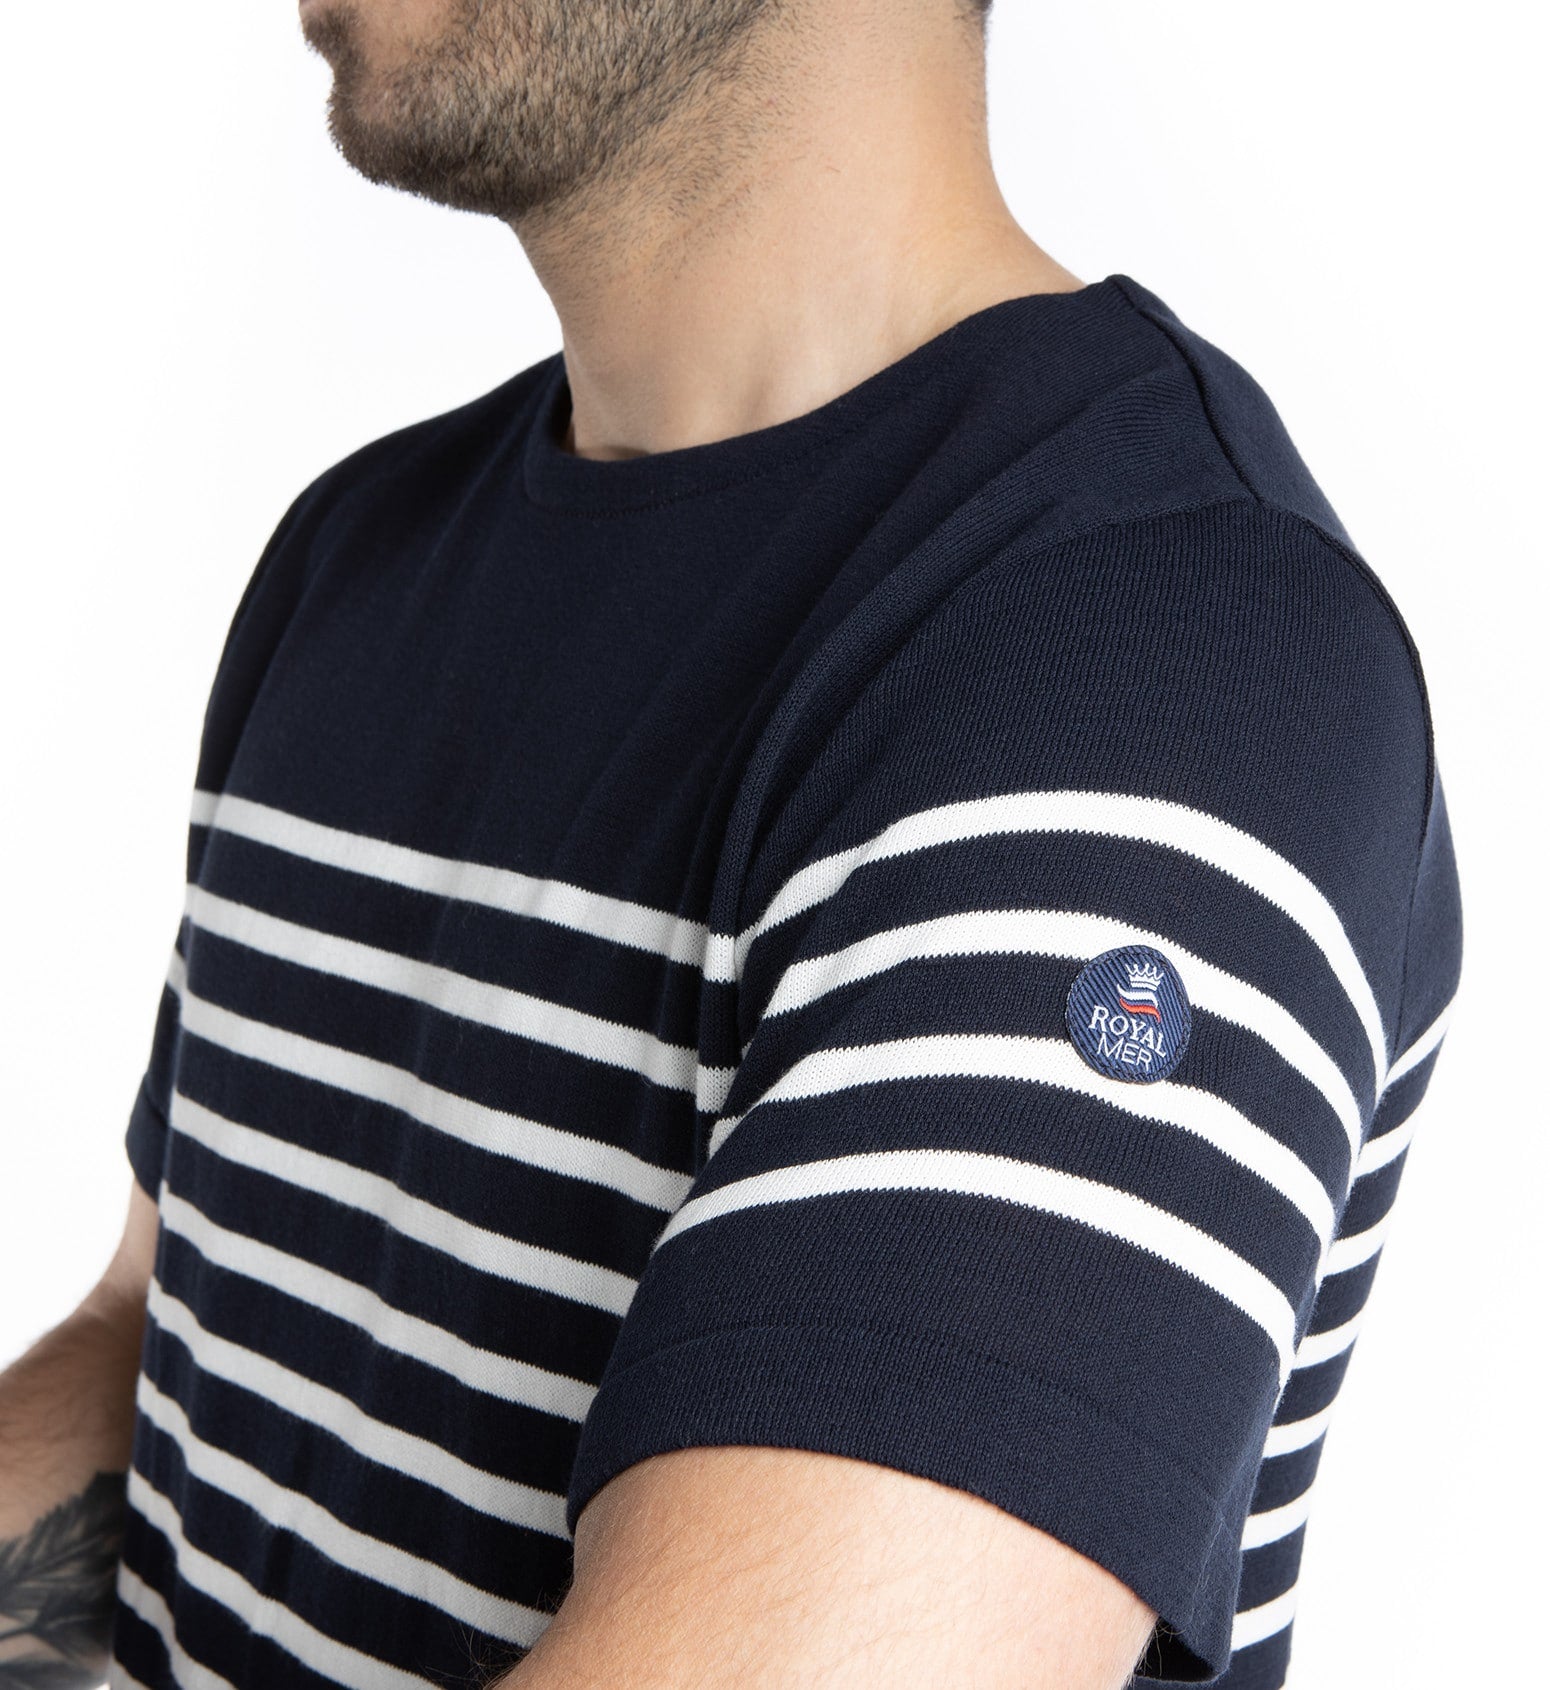 Short-sleeved striped sailor-style t-shirt